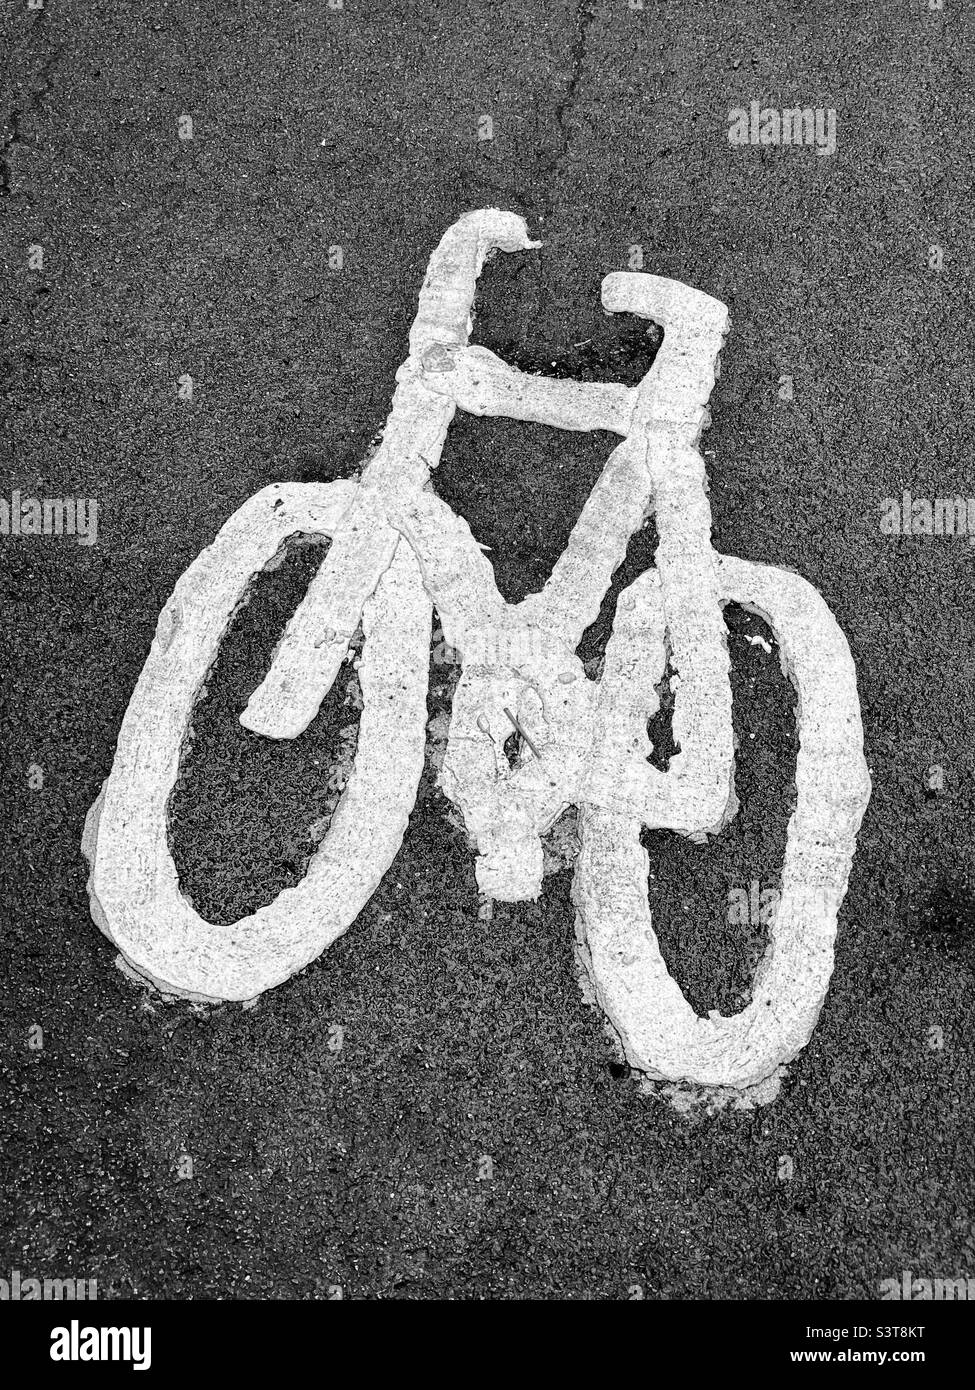 The hand drawn and painted image of a bicycle indicates this area is designated for cyclists. This is a cycle lane! Photo ©️ COLIN HOSKINS. Stock Photo